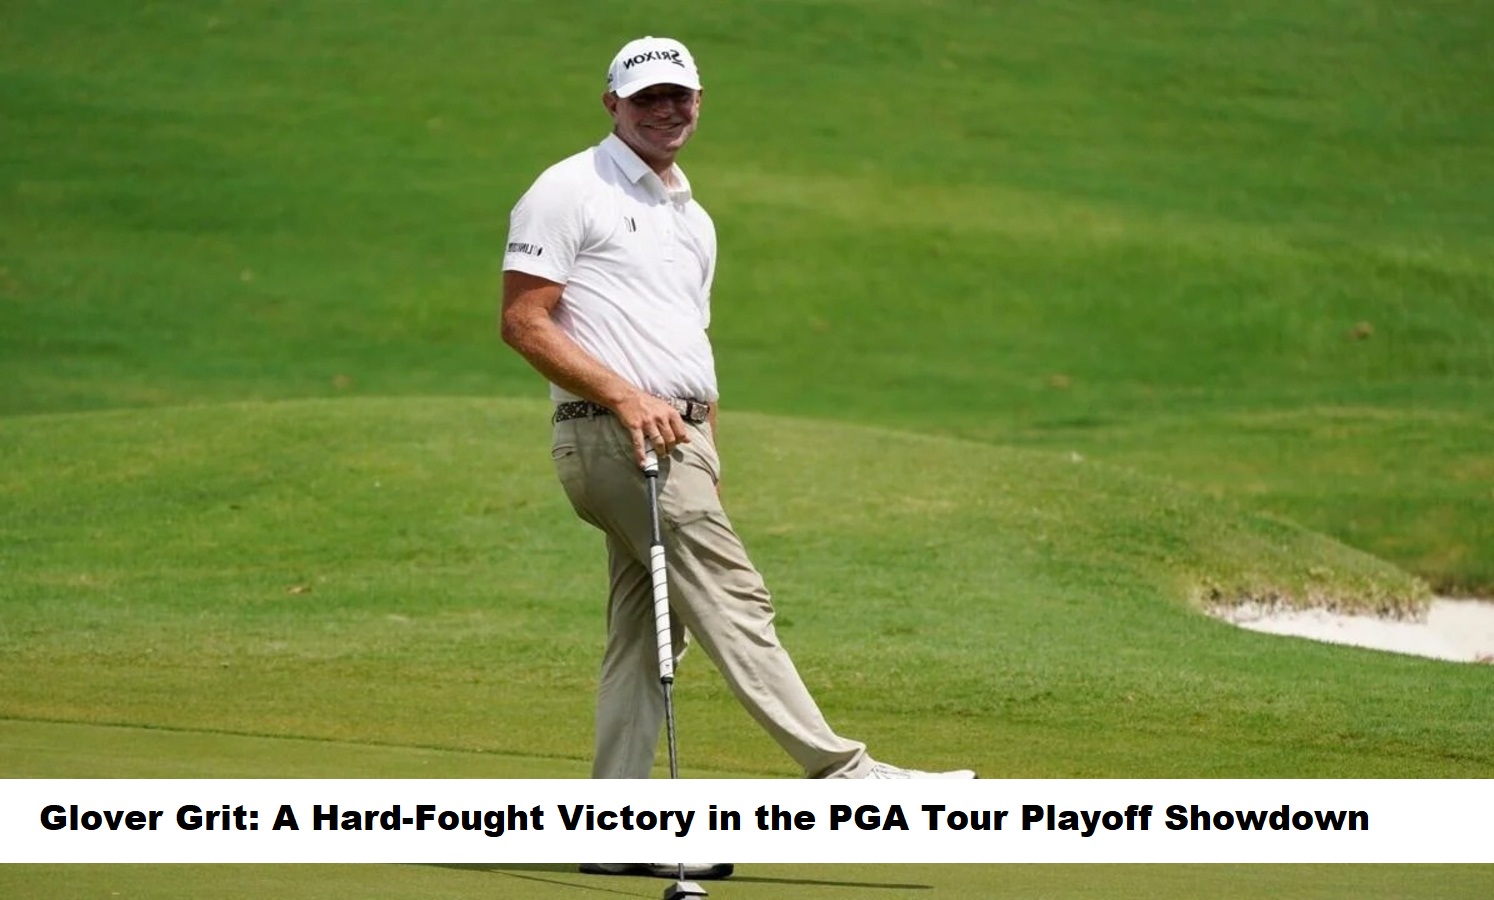 Glover Grit: A Hard-Fought Victory in the PGA Tour Playoff Showdown